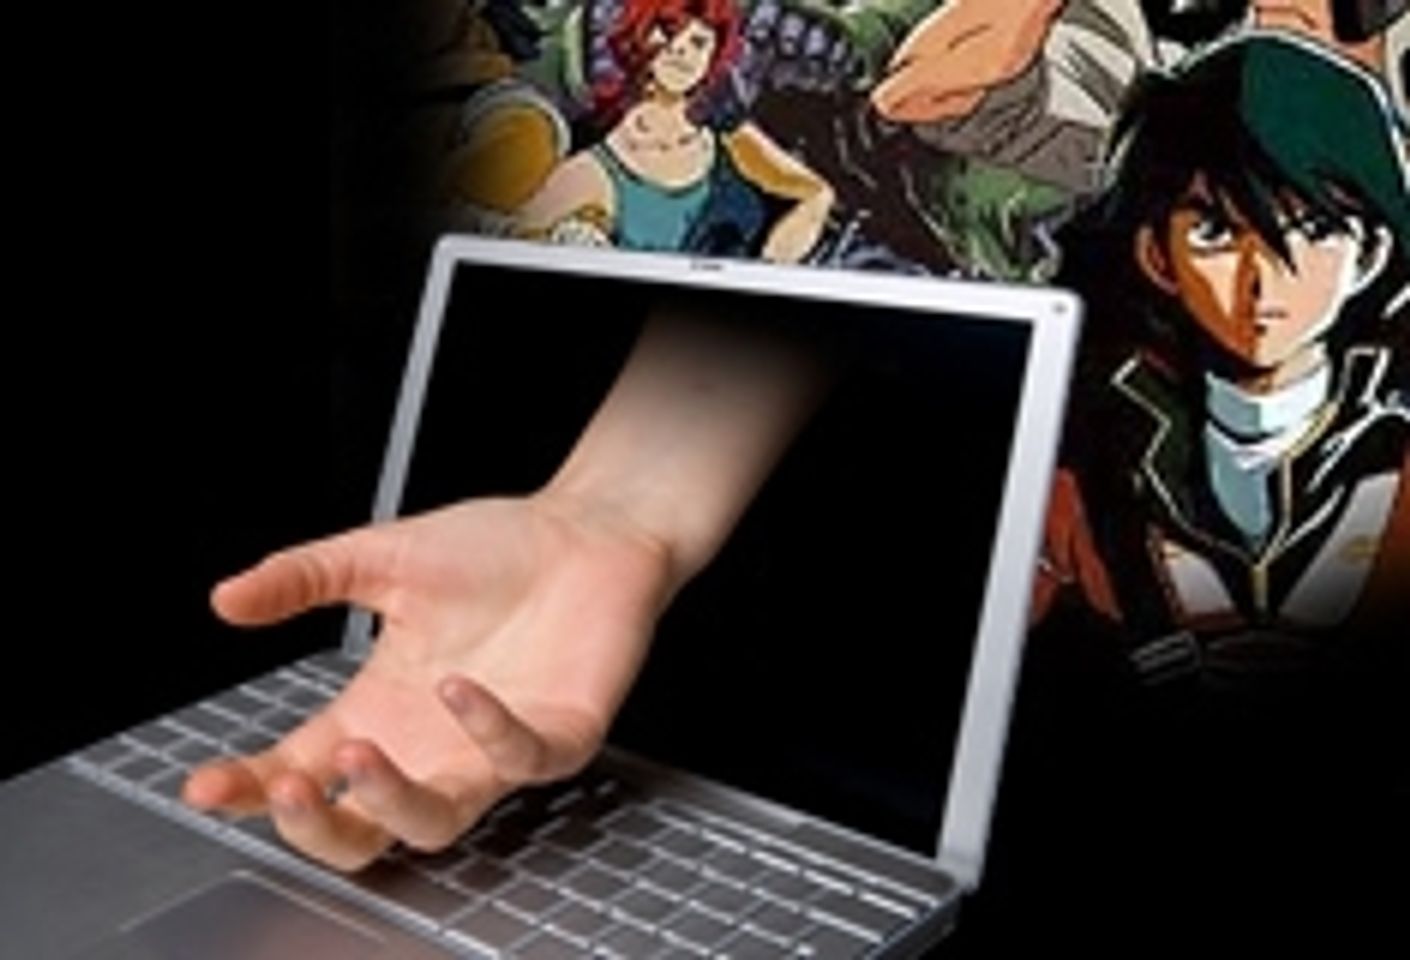 ISP Ordered to Reveal Identities of BitTorrent Anime Sharers